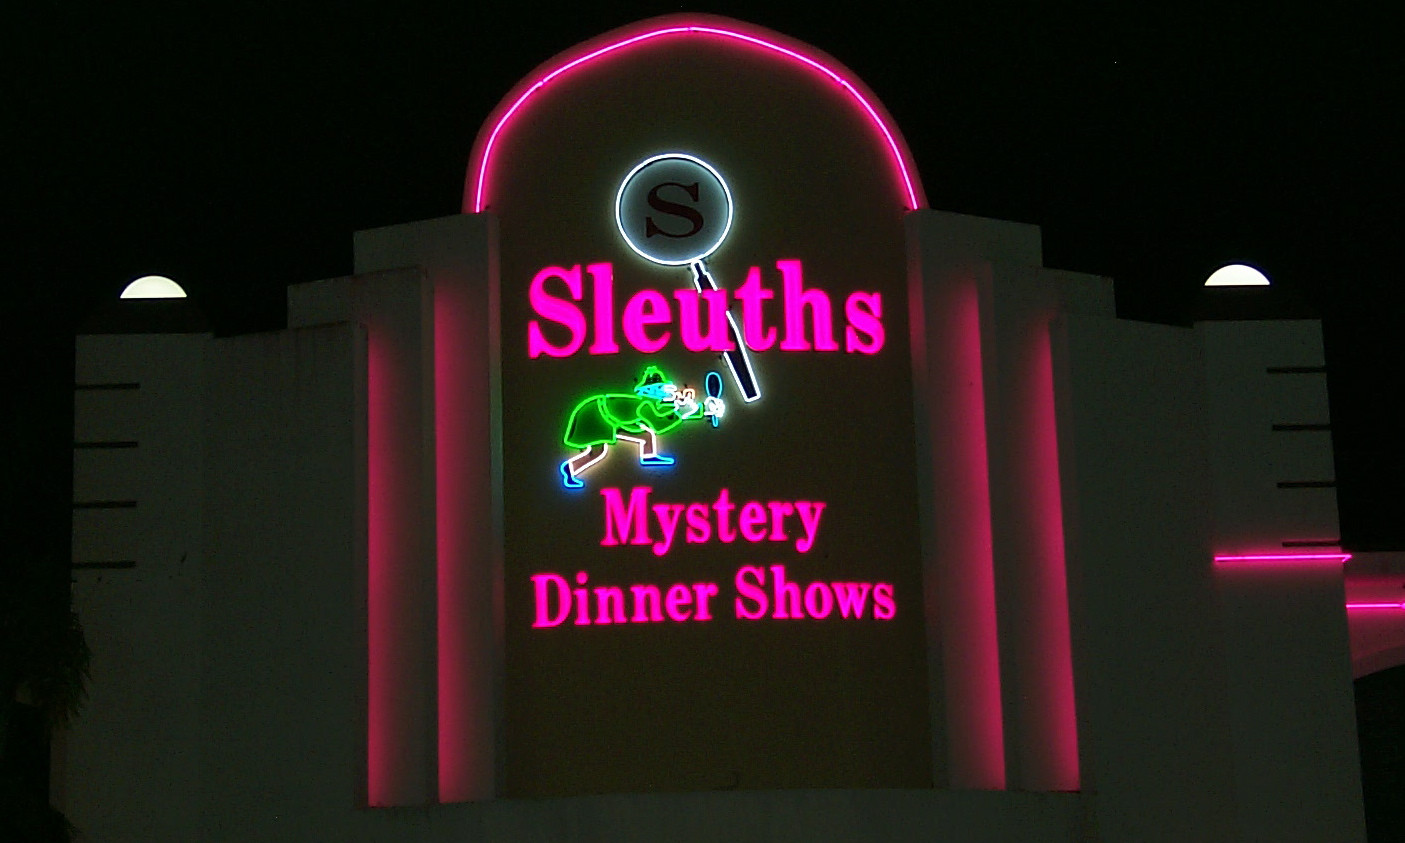 Sleuths Mystery Dinner Shows
 Sleuths Mystery Dinner Shows